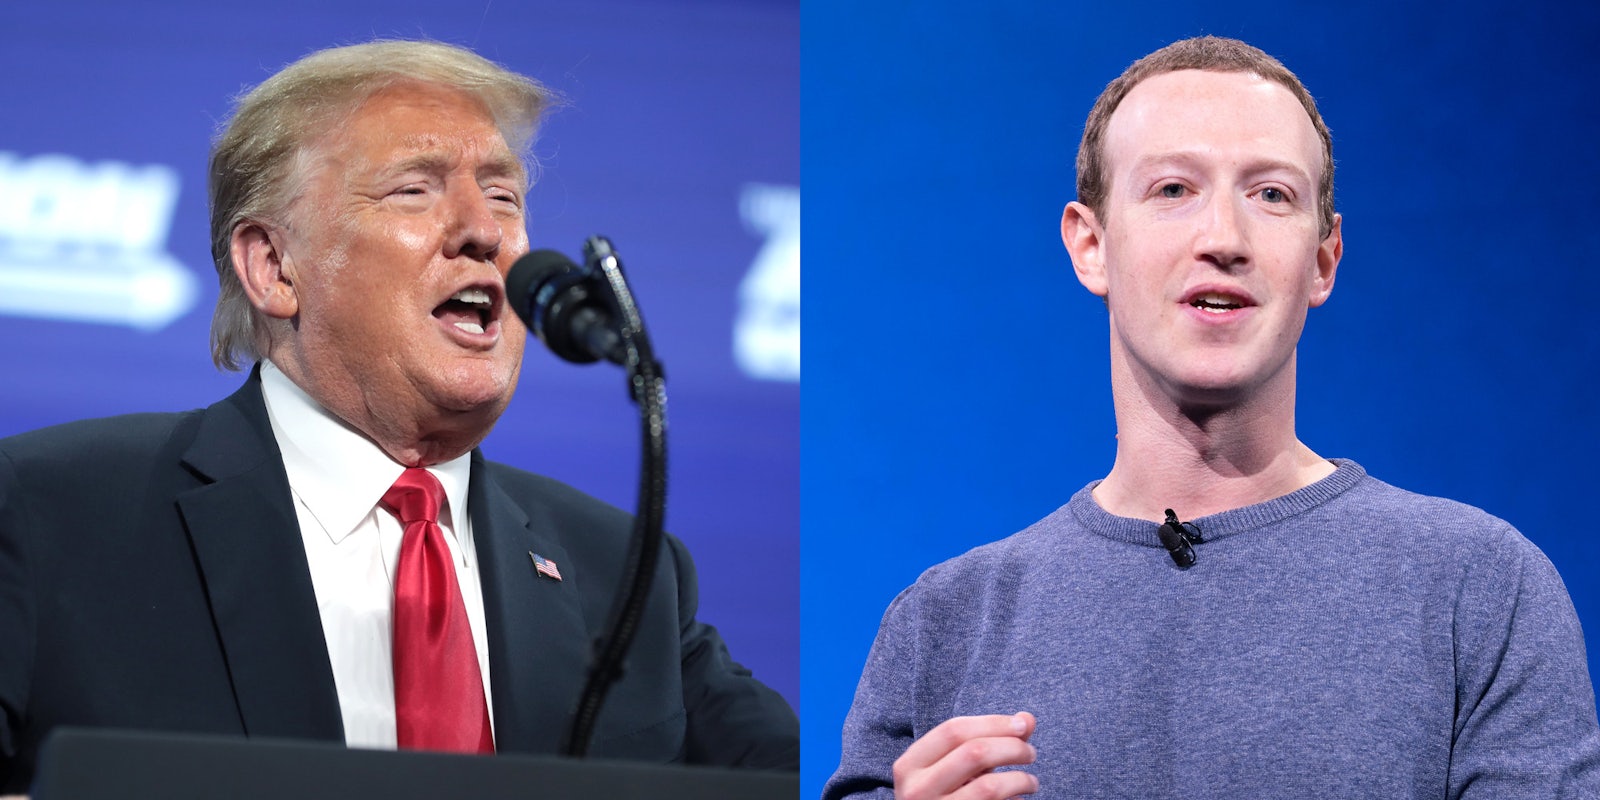 A side by side of former President Donald Trump and Facebook CEO Mark Zuckerberg.